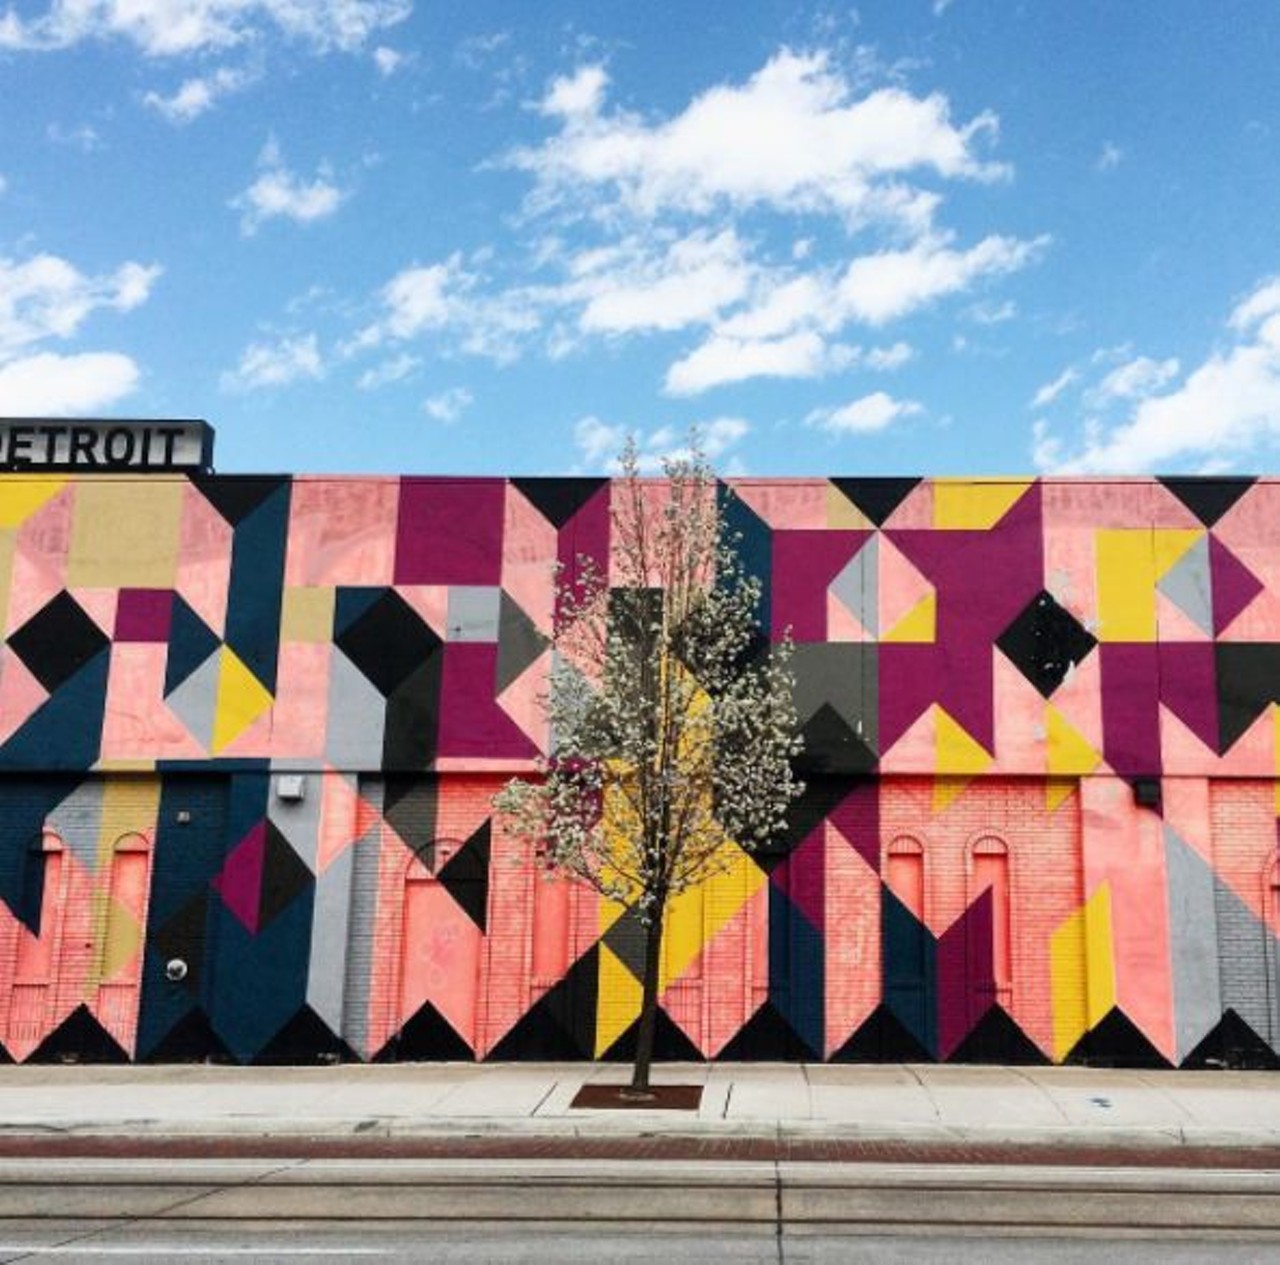 Actually, go anywhere with art
The DIA, MOCAD, The Wright Museum, and the dozen more art galleries scattered throughout metro Detroit will make you an intellectual stoner that naysayers say don&#146;t exist.&nbsp;Photo via IG user @laurajude_